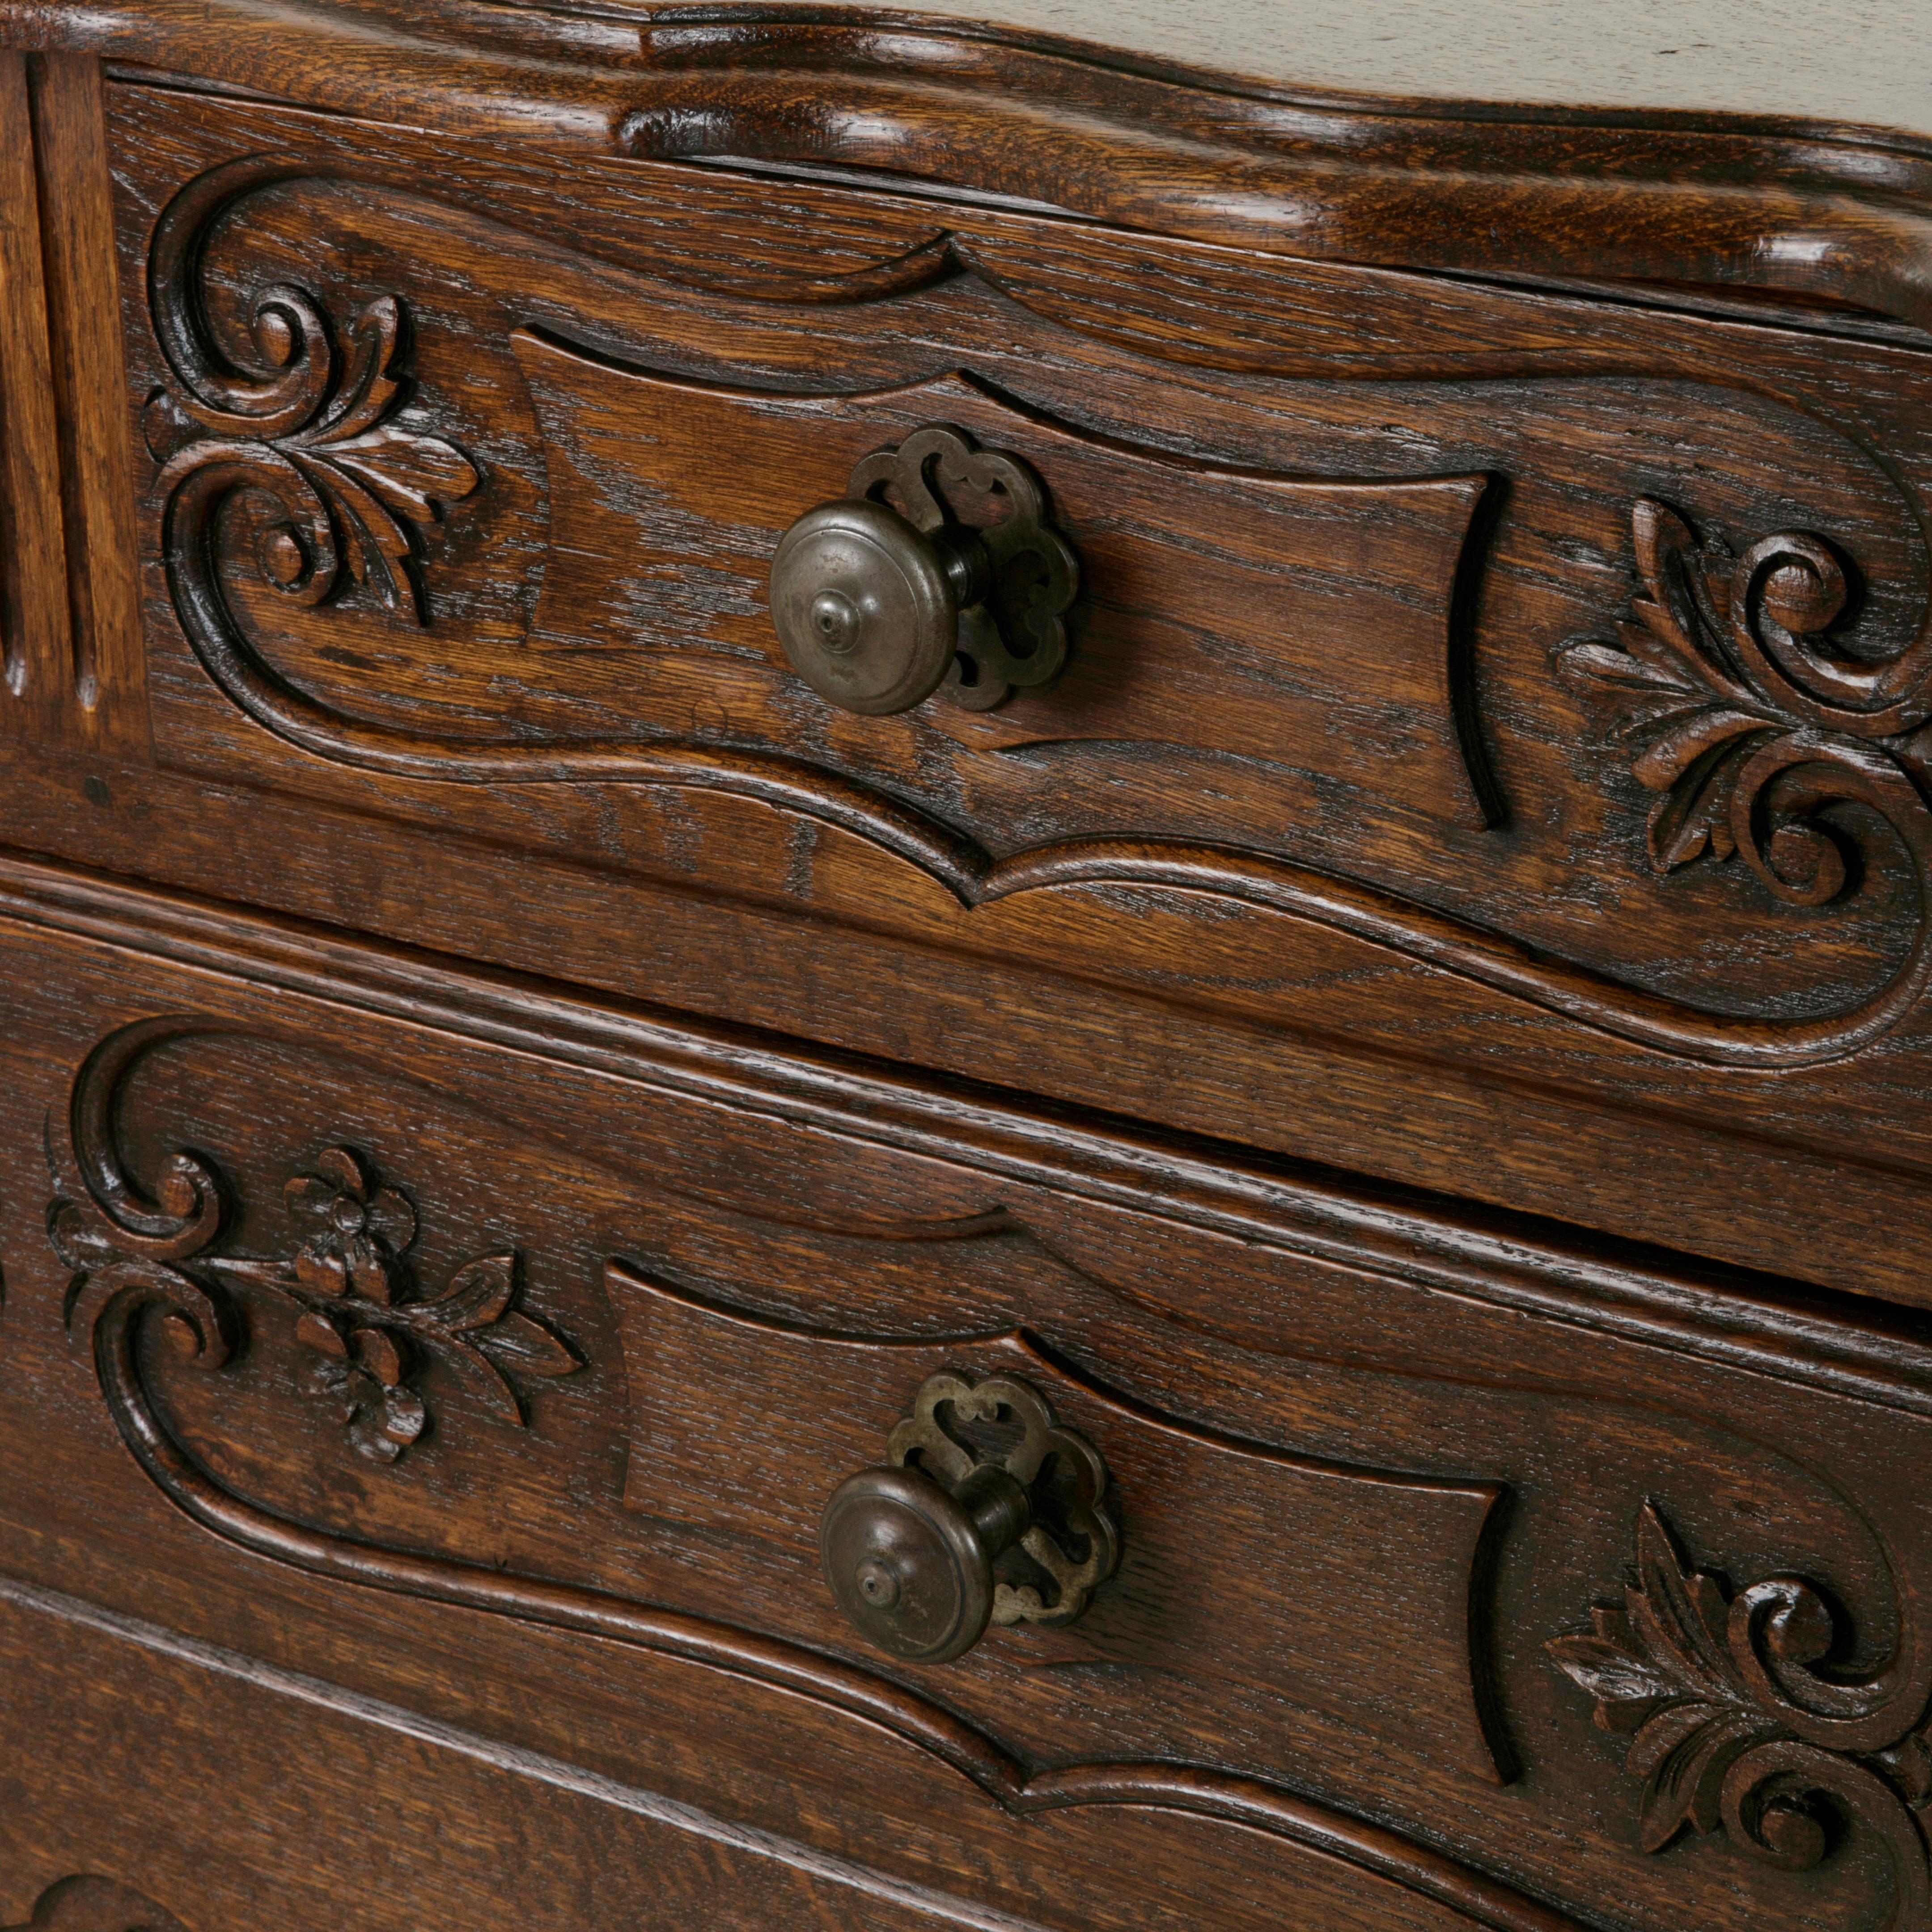 This early 20th century French Louis XV style oak commode sauteuse or chest features hand carved details of leaves, flowers and scrolling and is finished with a beveled oak top made from a single plank of wood. A commode sauteuse or 